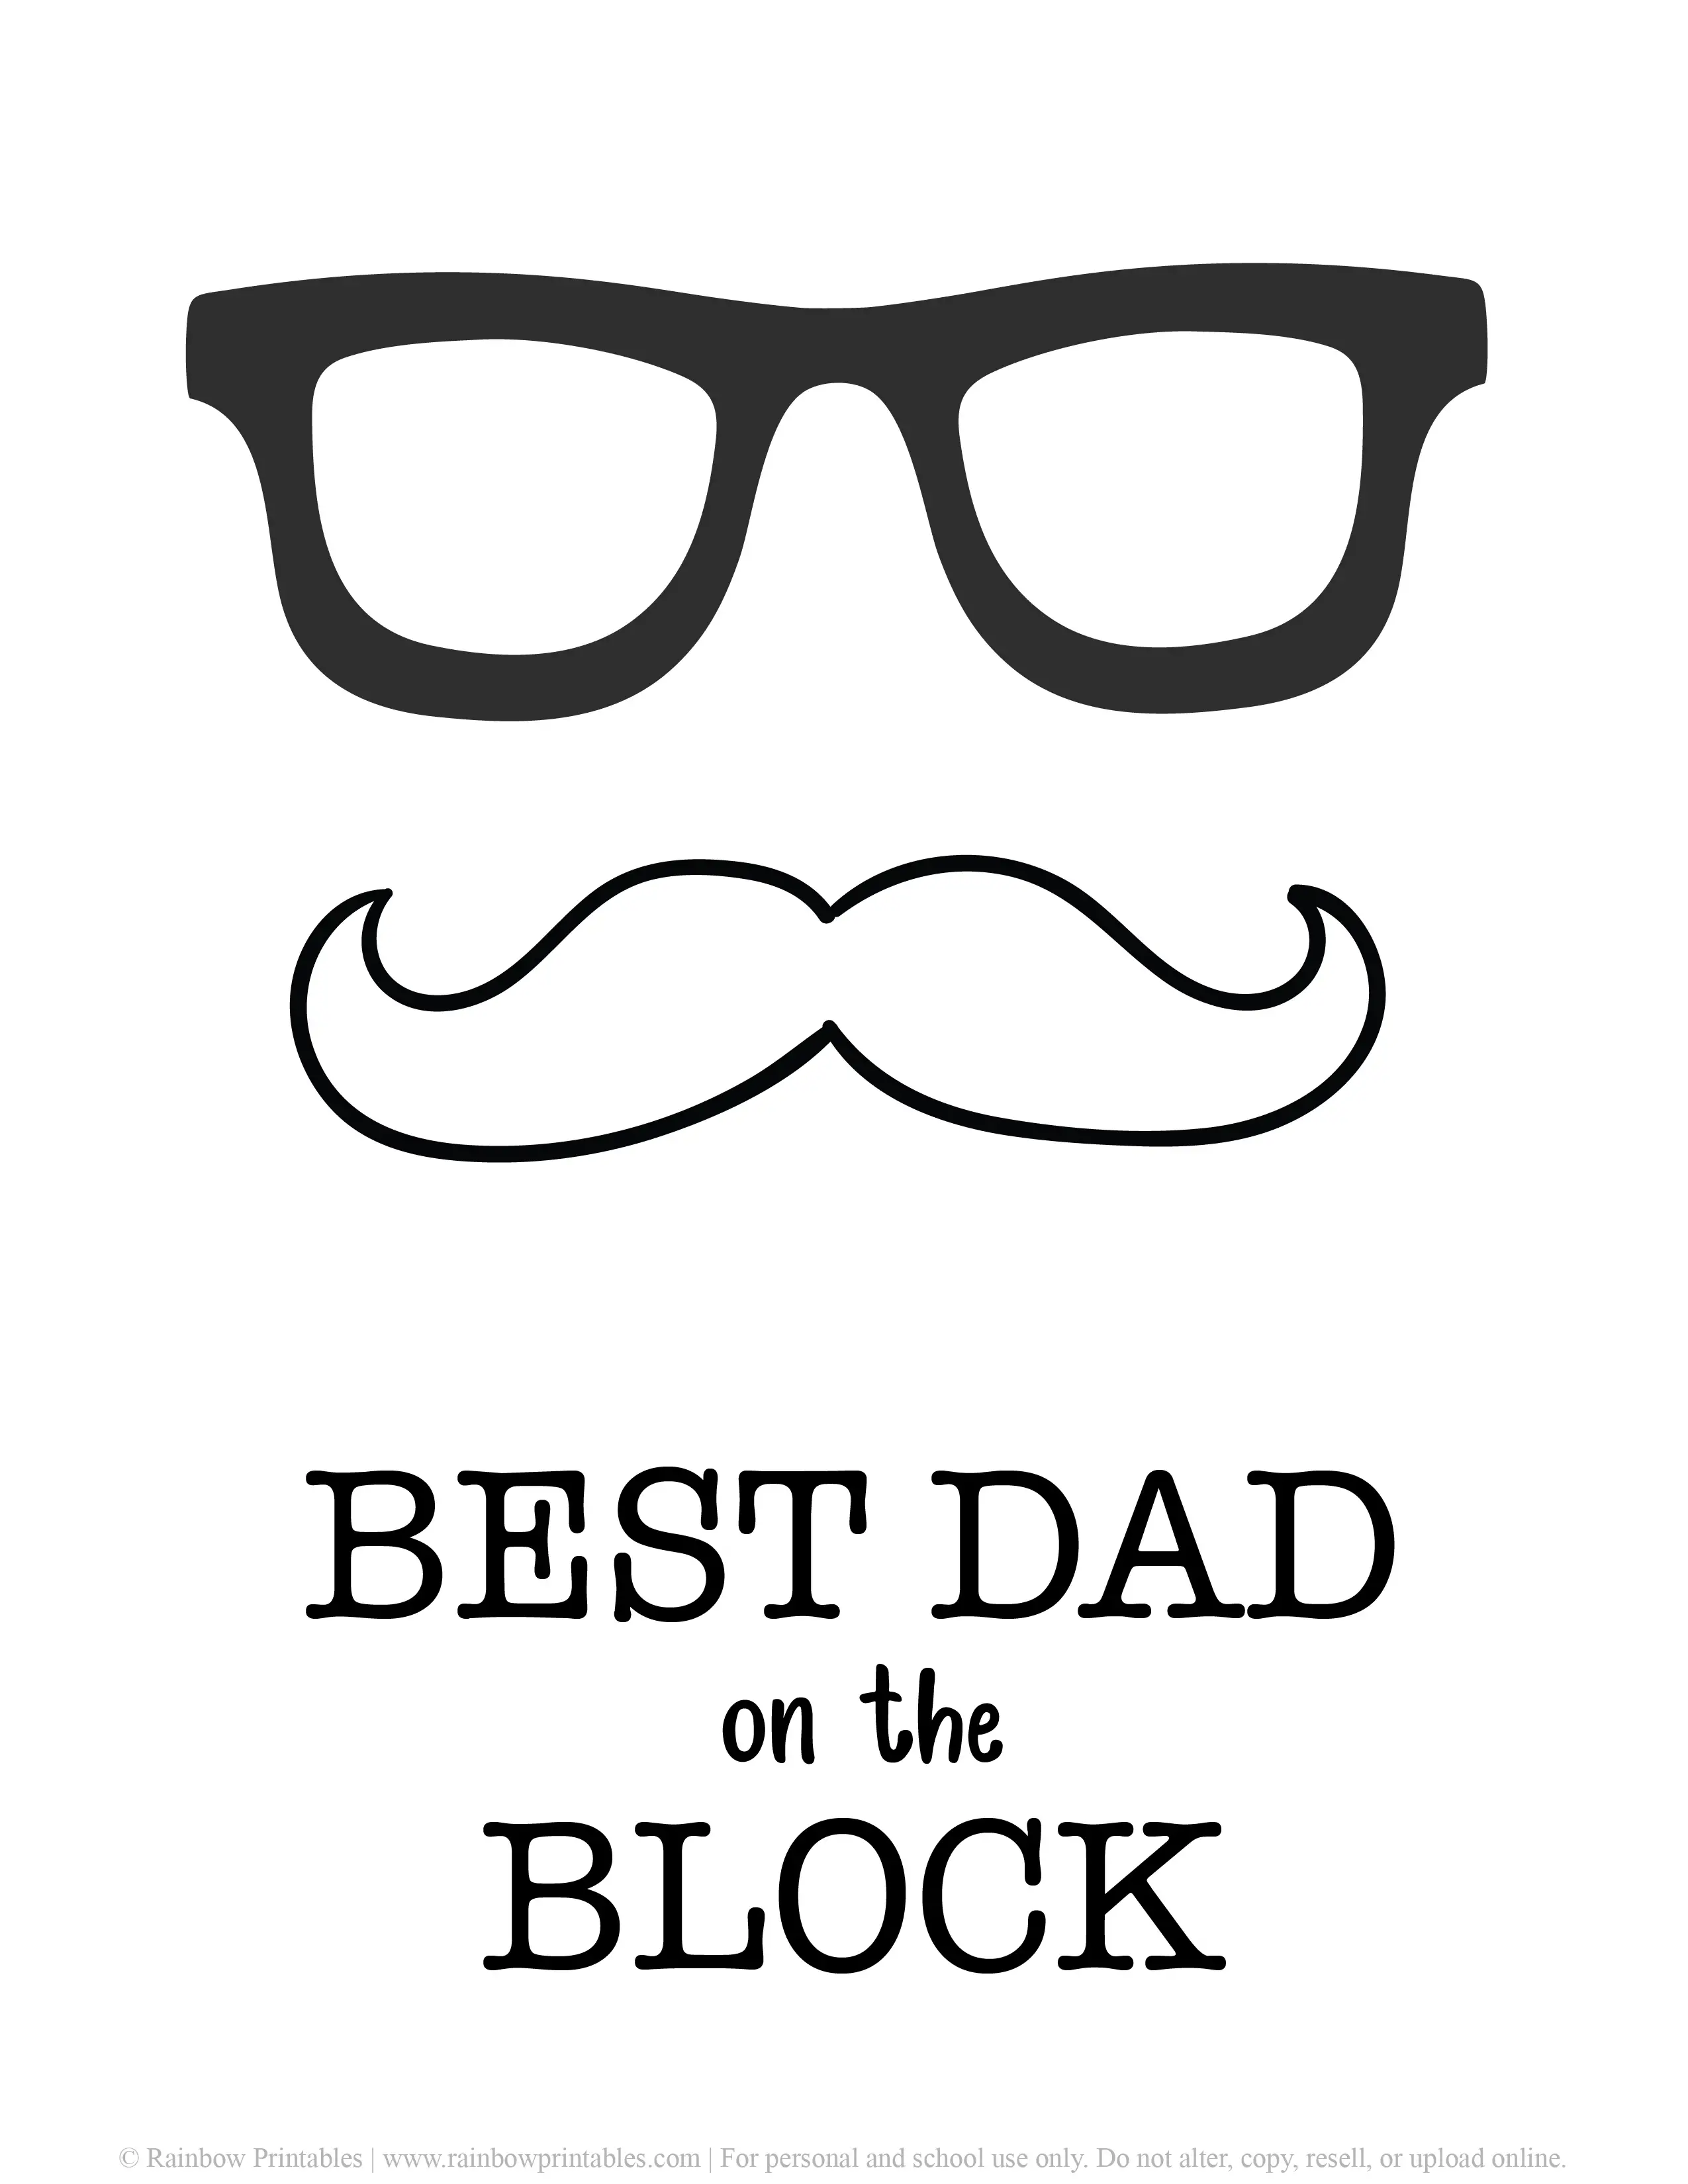 Father's Day Punny Cards & Coloring Pages Printable Hipster Best DAD on the Block Mustache Glasses Funny Dorky Pun Dad Jokes Coloring Activity